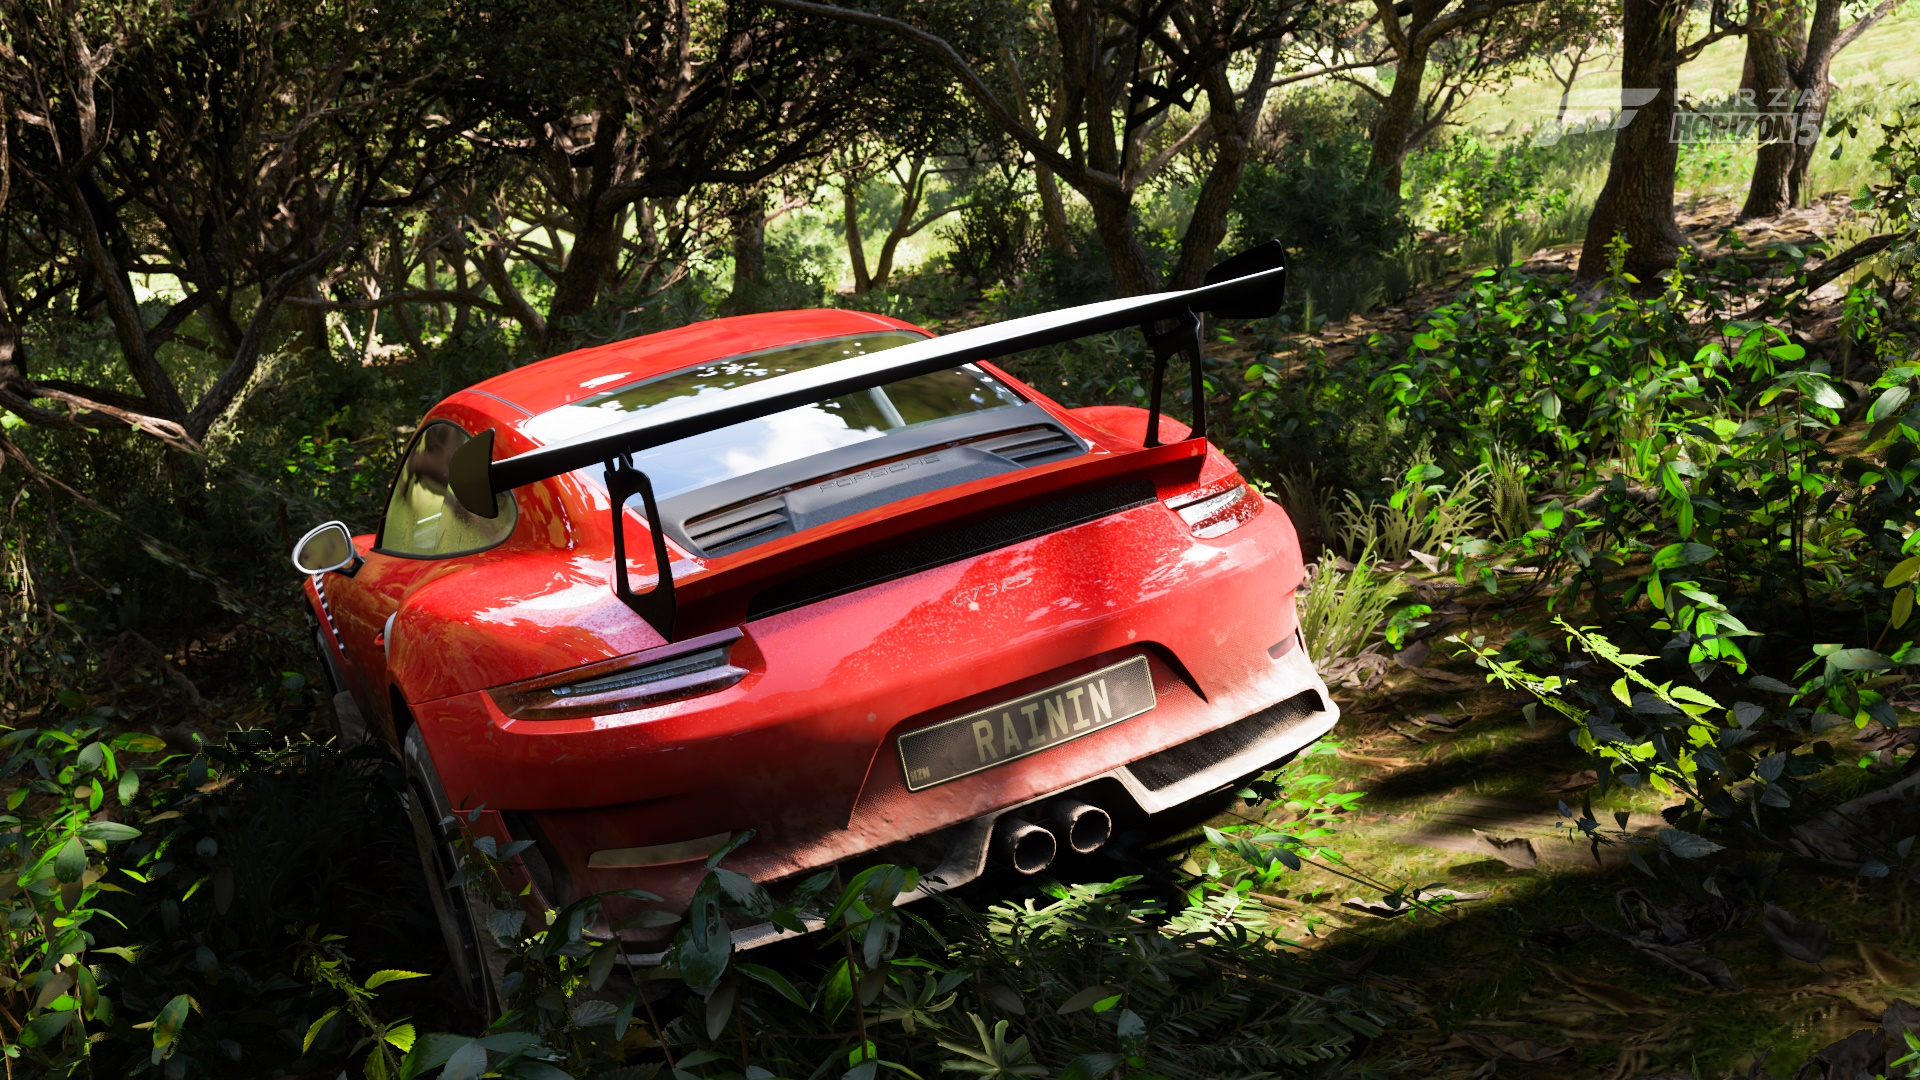 General 1920x1080 red cars car Porsche 911 GT3 R red forest Forza Forza Horizon 5 offroad race cars modified nature Porsche German cars Volkswagen Group PlaygroundGames Xbox Game Studios